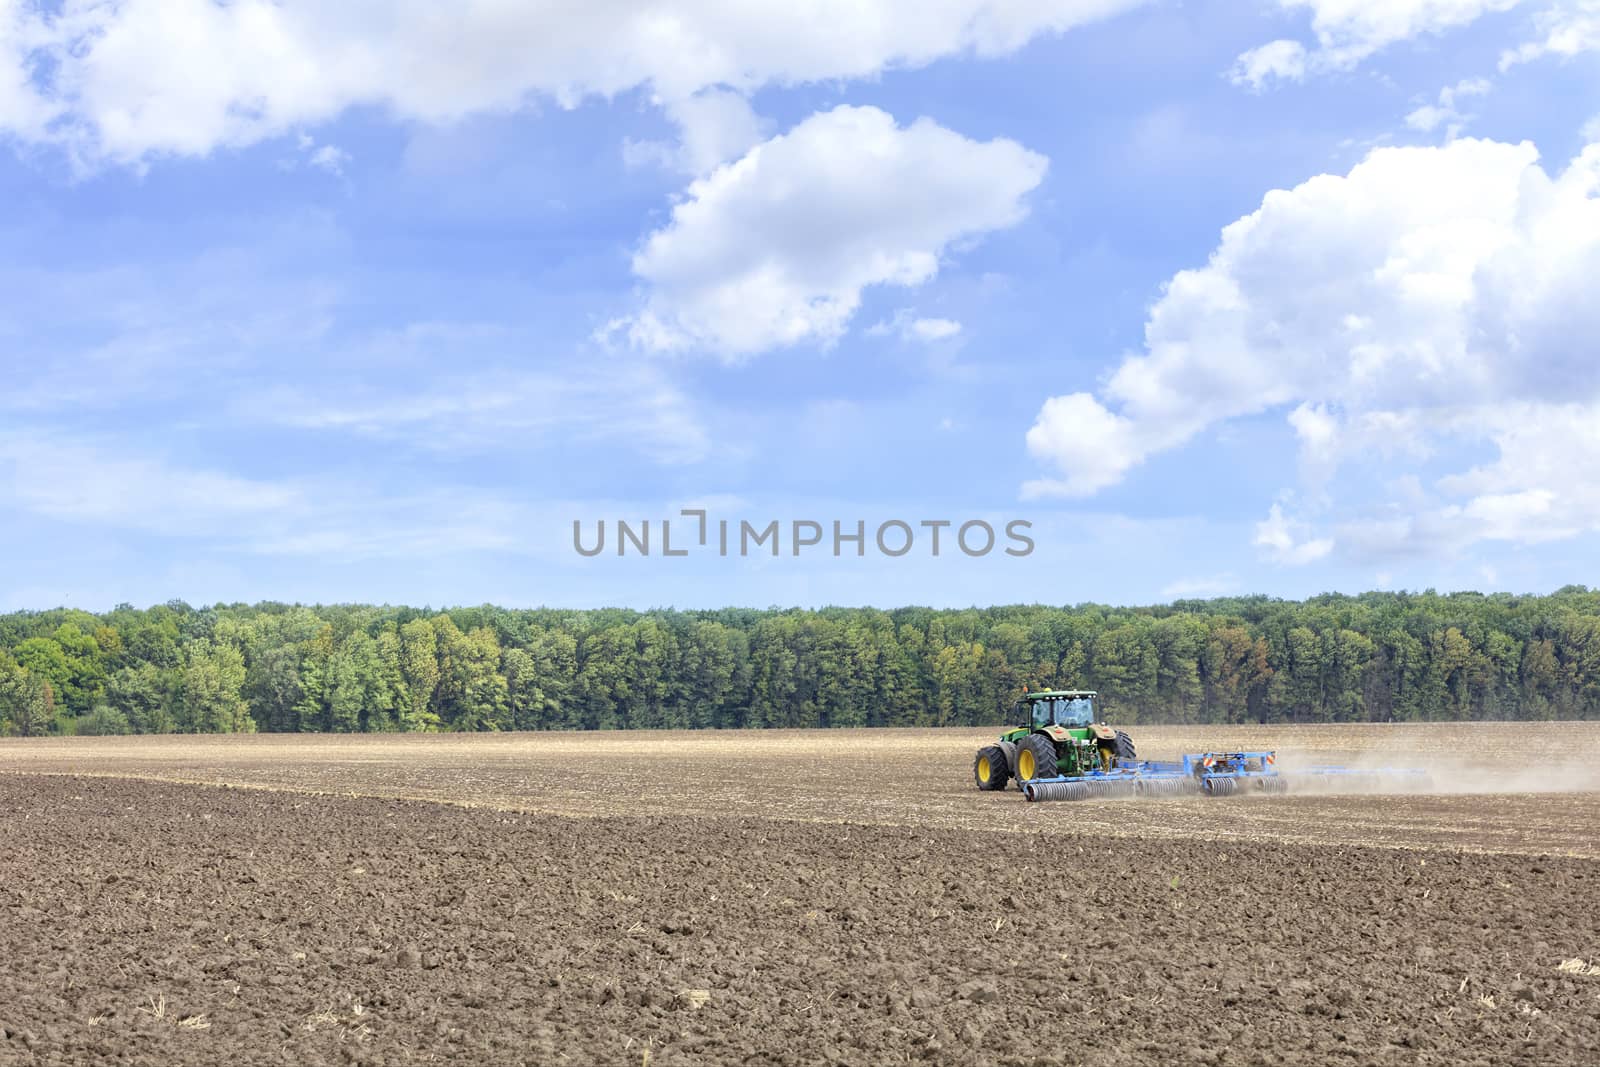 A tractor in a field shallowly plows the soil with metal discs after harvesting against a blue cloudy sky.